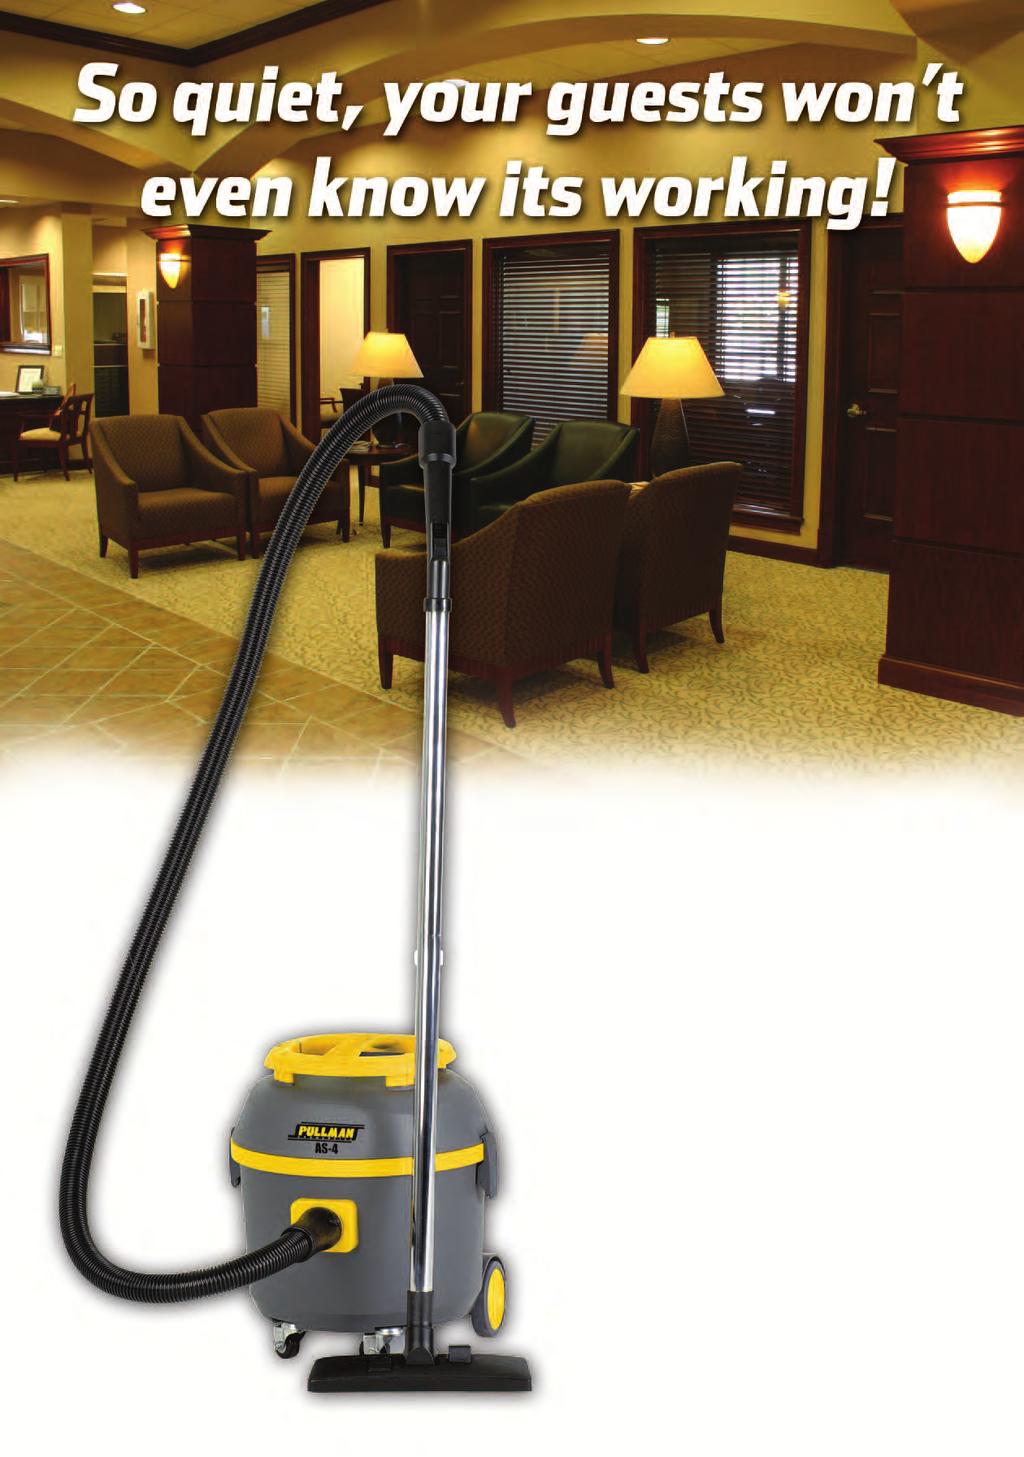 Pullman AS4 Vacuum Cleaner Ultra quiet commercial vacuum cleaner ideal for hotels,